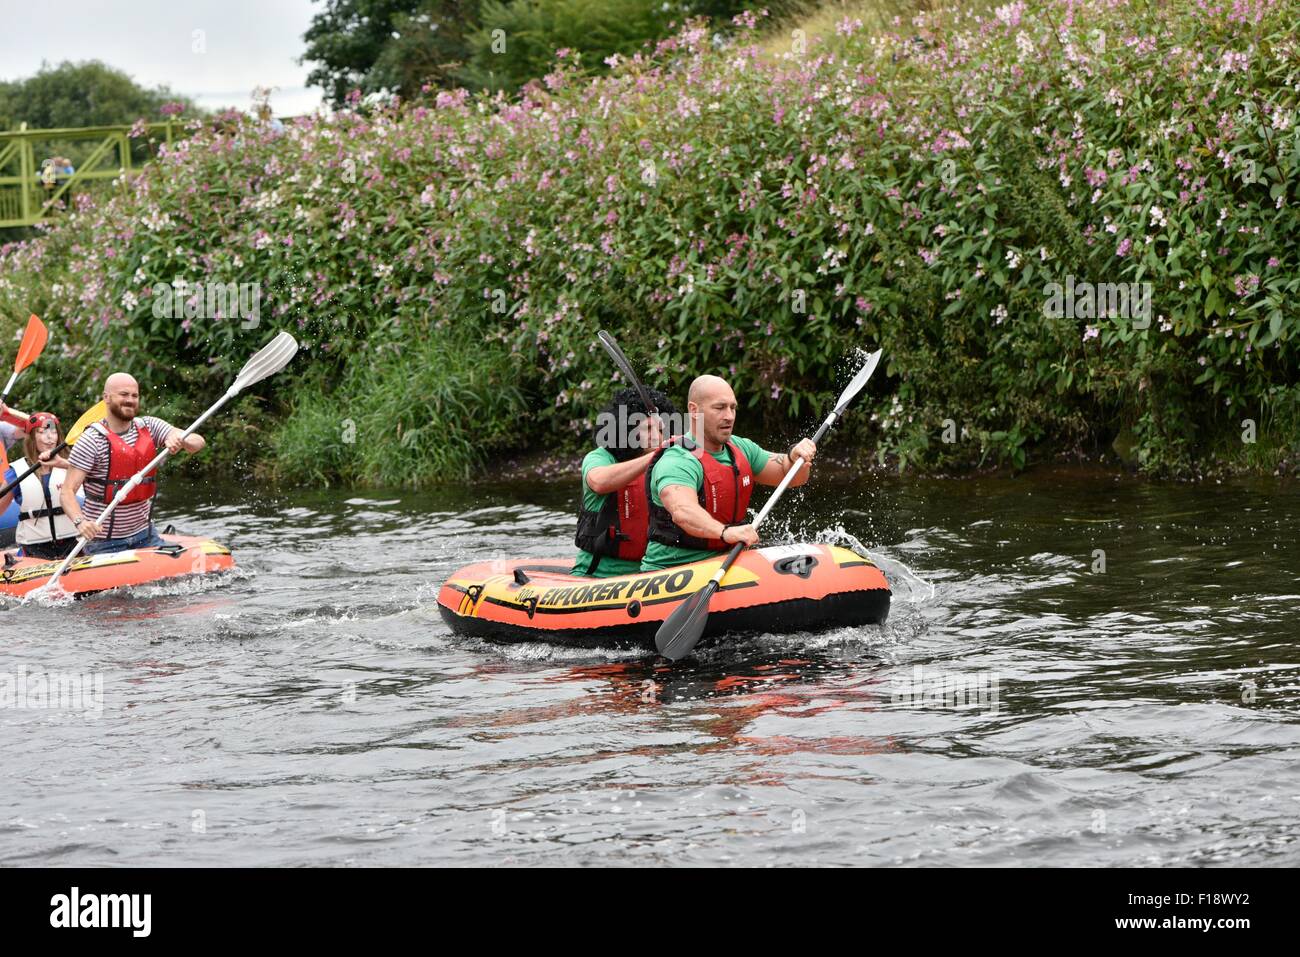 Manchester, UK  30th August 2015 The Annual Northenden Boat Race, started in 2006, goes  about a mile from Simon's Bridge, Didsbury along the River Mersey to Northenden Bridge. This year there are two categories, one for canoes and kayaks, the other for dinghies. A fun event to raise money for The Christie Hospital, it has a competitive edge, with a trophy awarded to the winners of each category. Northenden Boat Race 2015  Manchester, UK Credit:  John Fryer/Alamy Live News Stock Photo